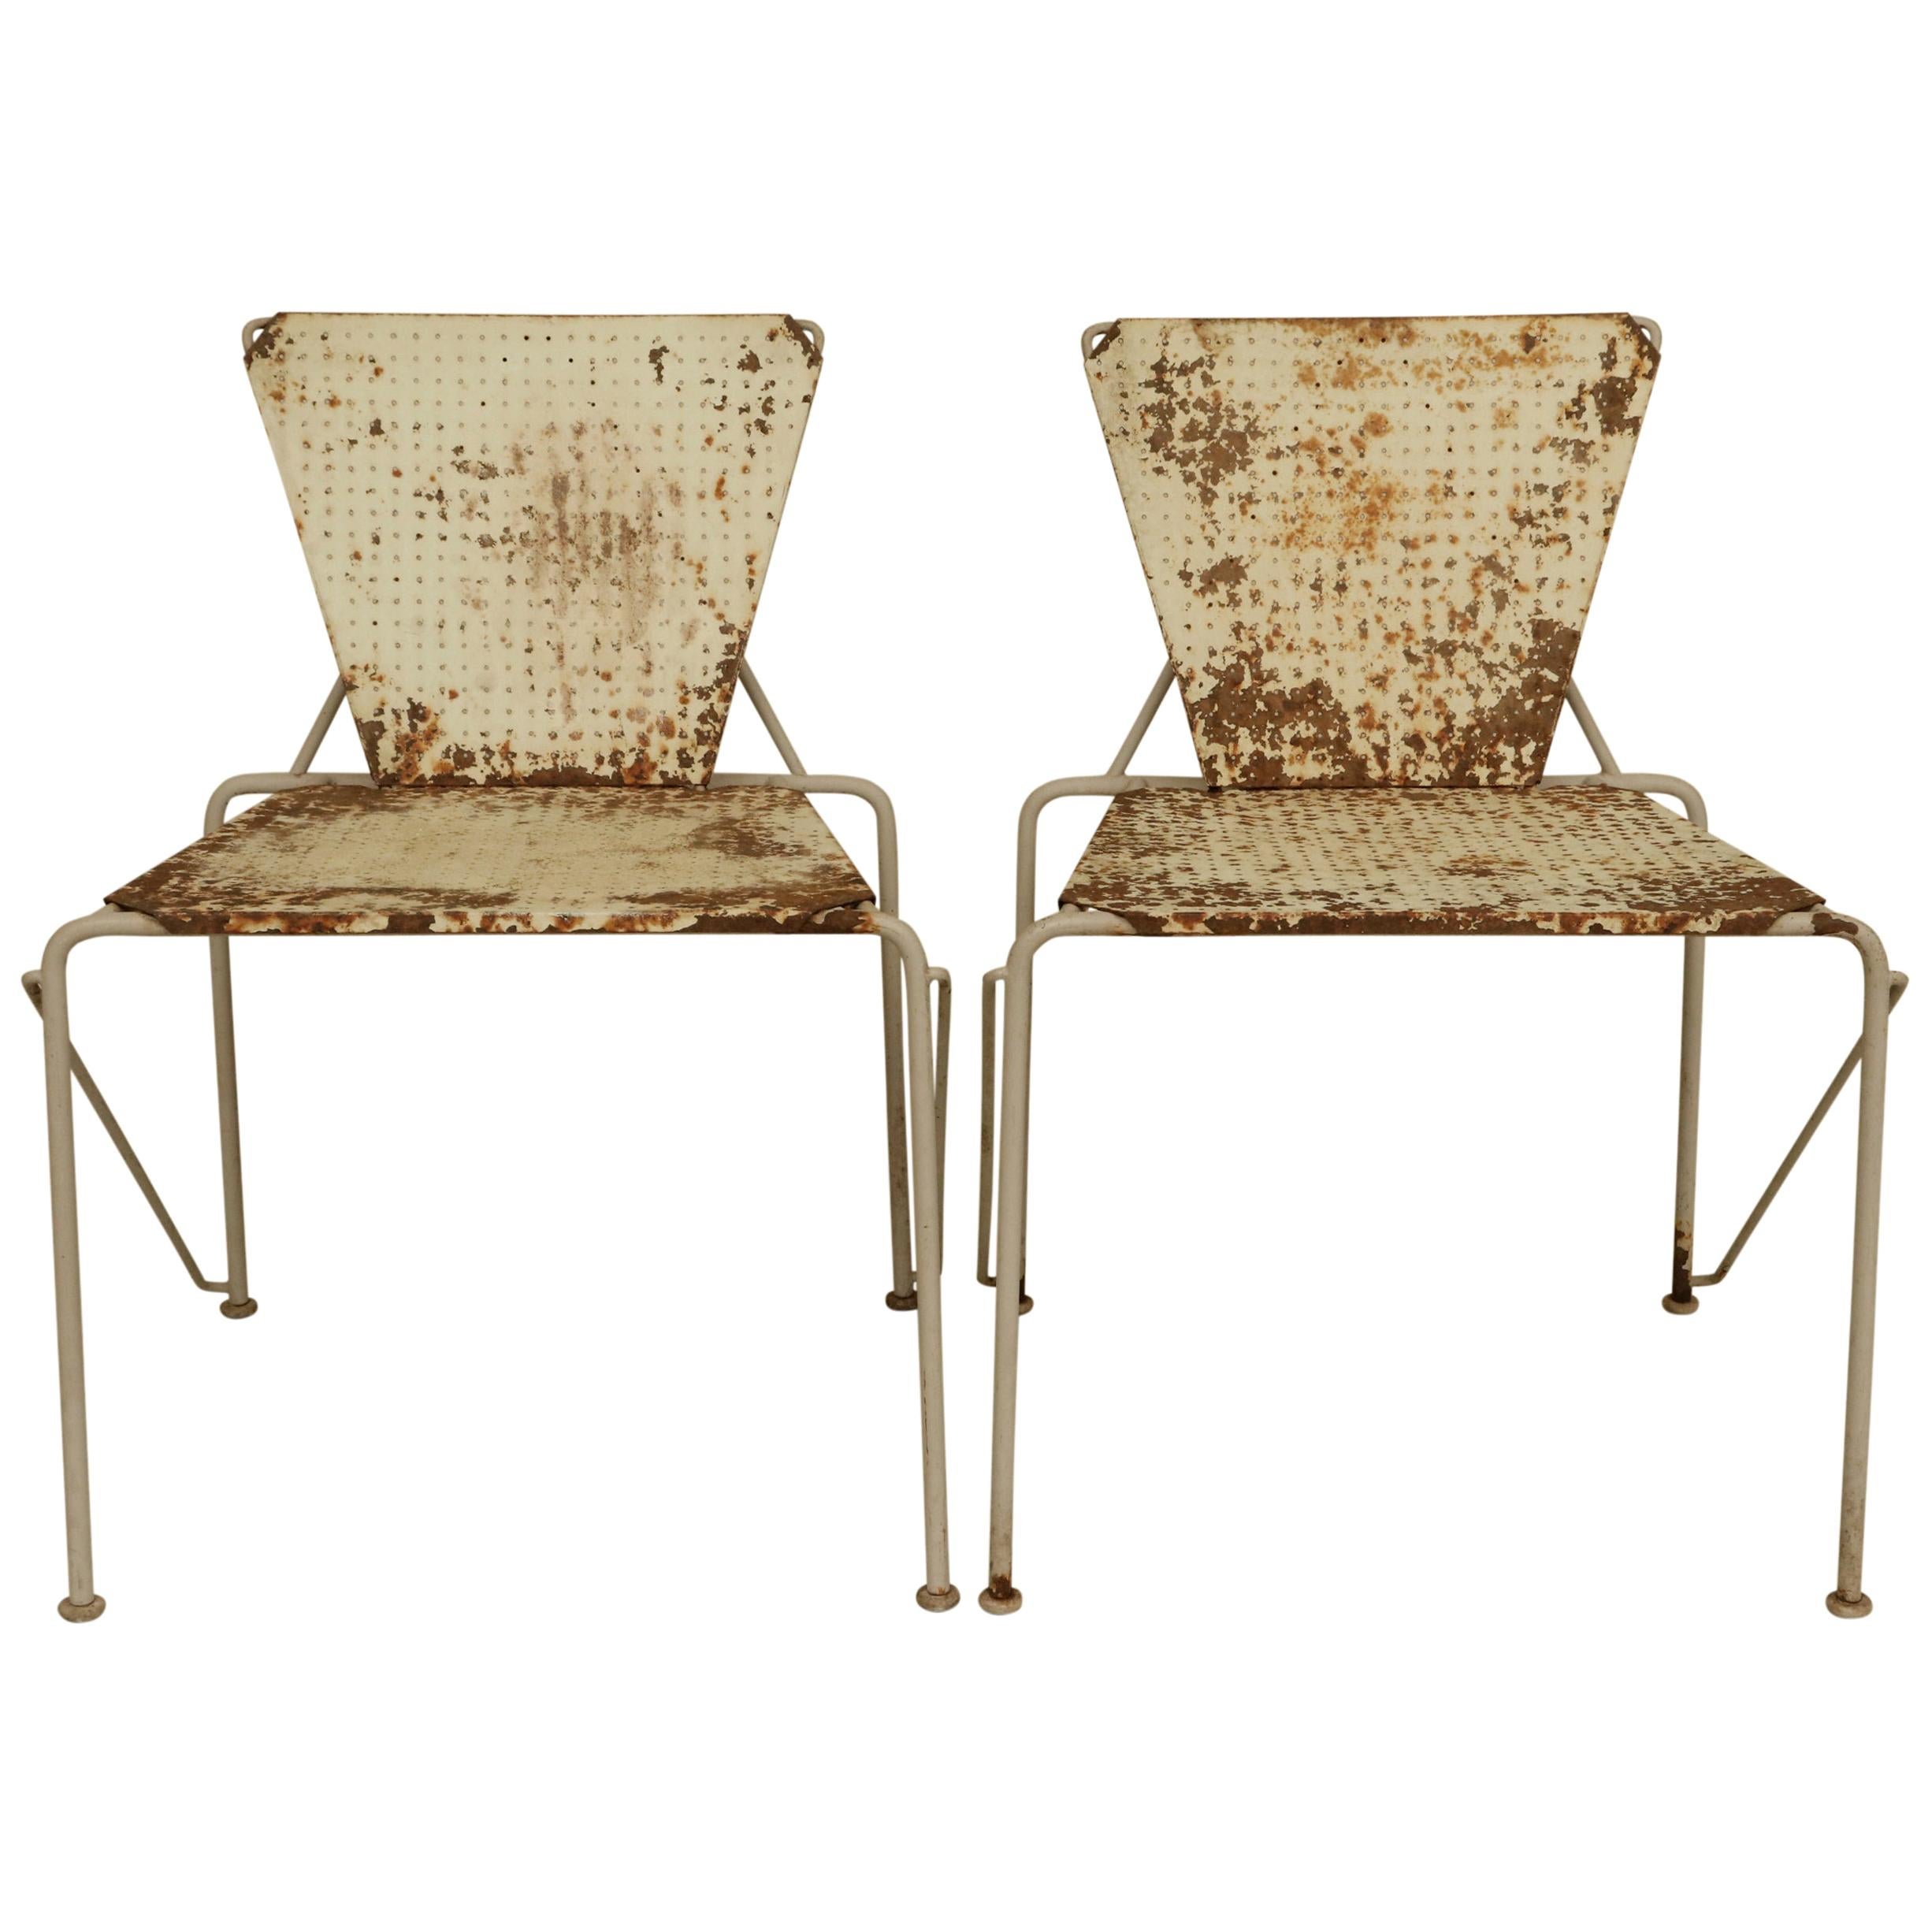 Pair of Modern Pierced Metal Chairs with Rustic Finish For Sale